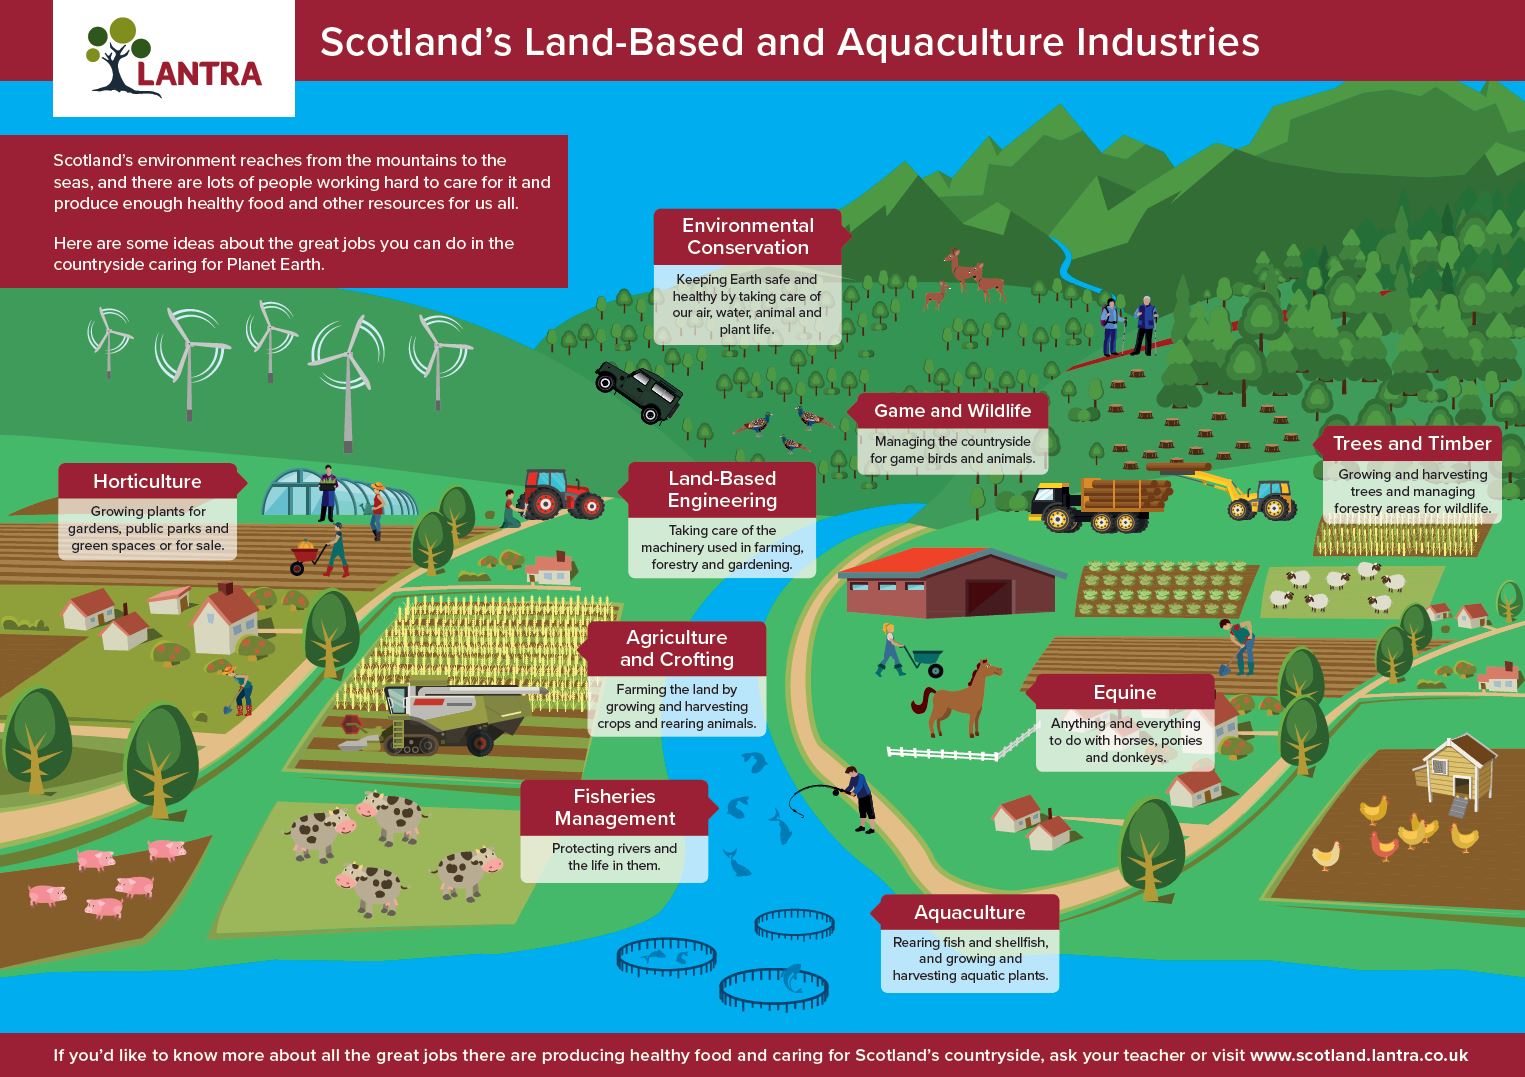 Poster for on the land-based and aquaculture industries